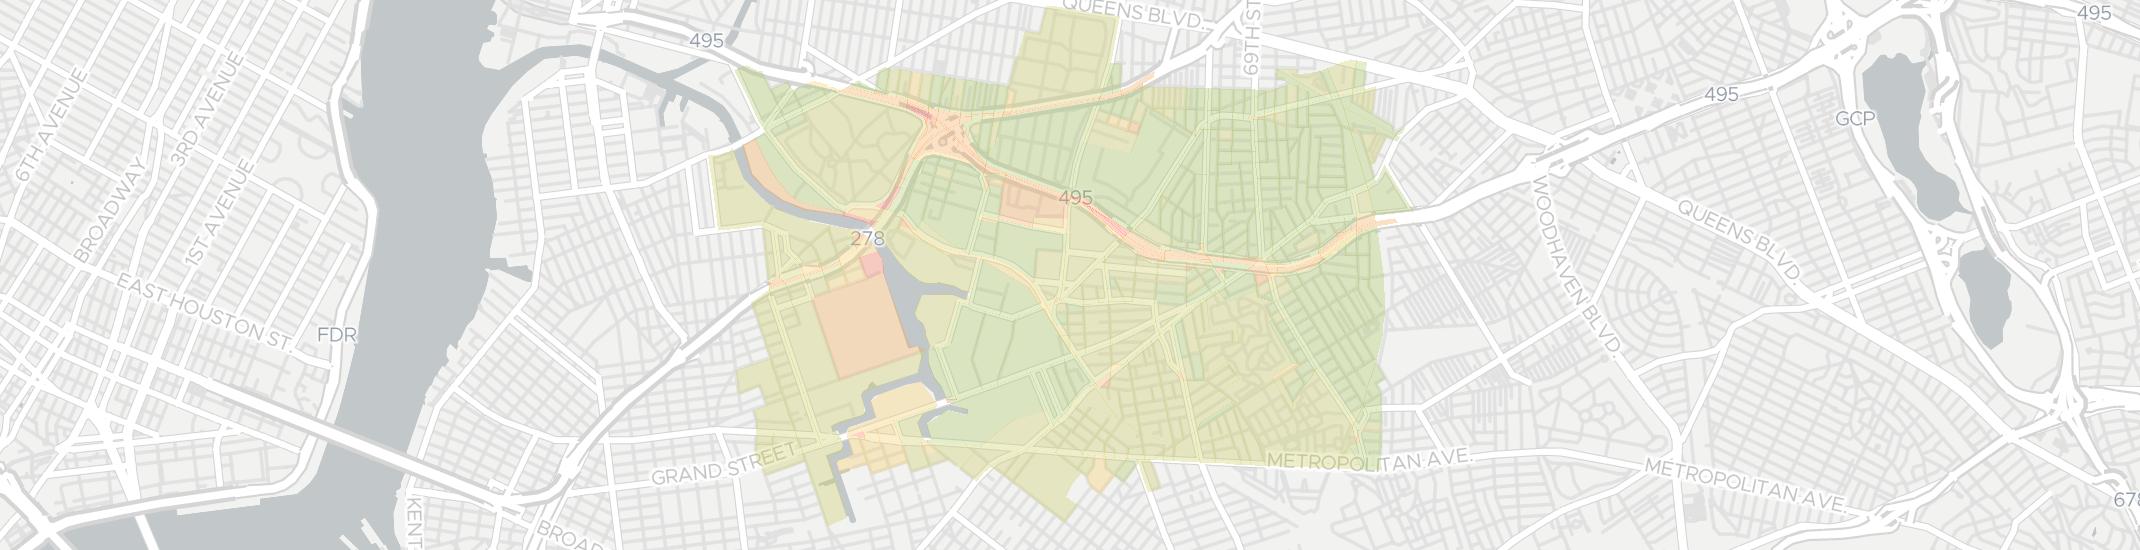 Maspeth Internet Competition Map. Click for interactive map.